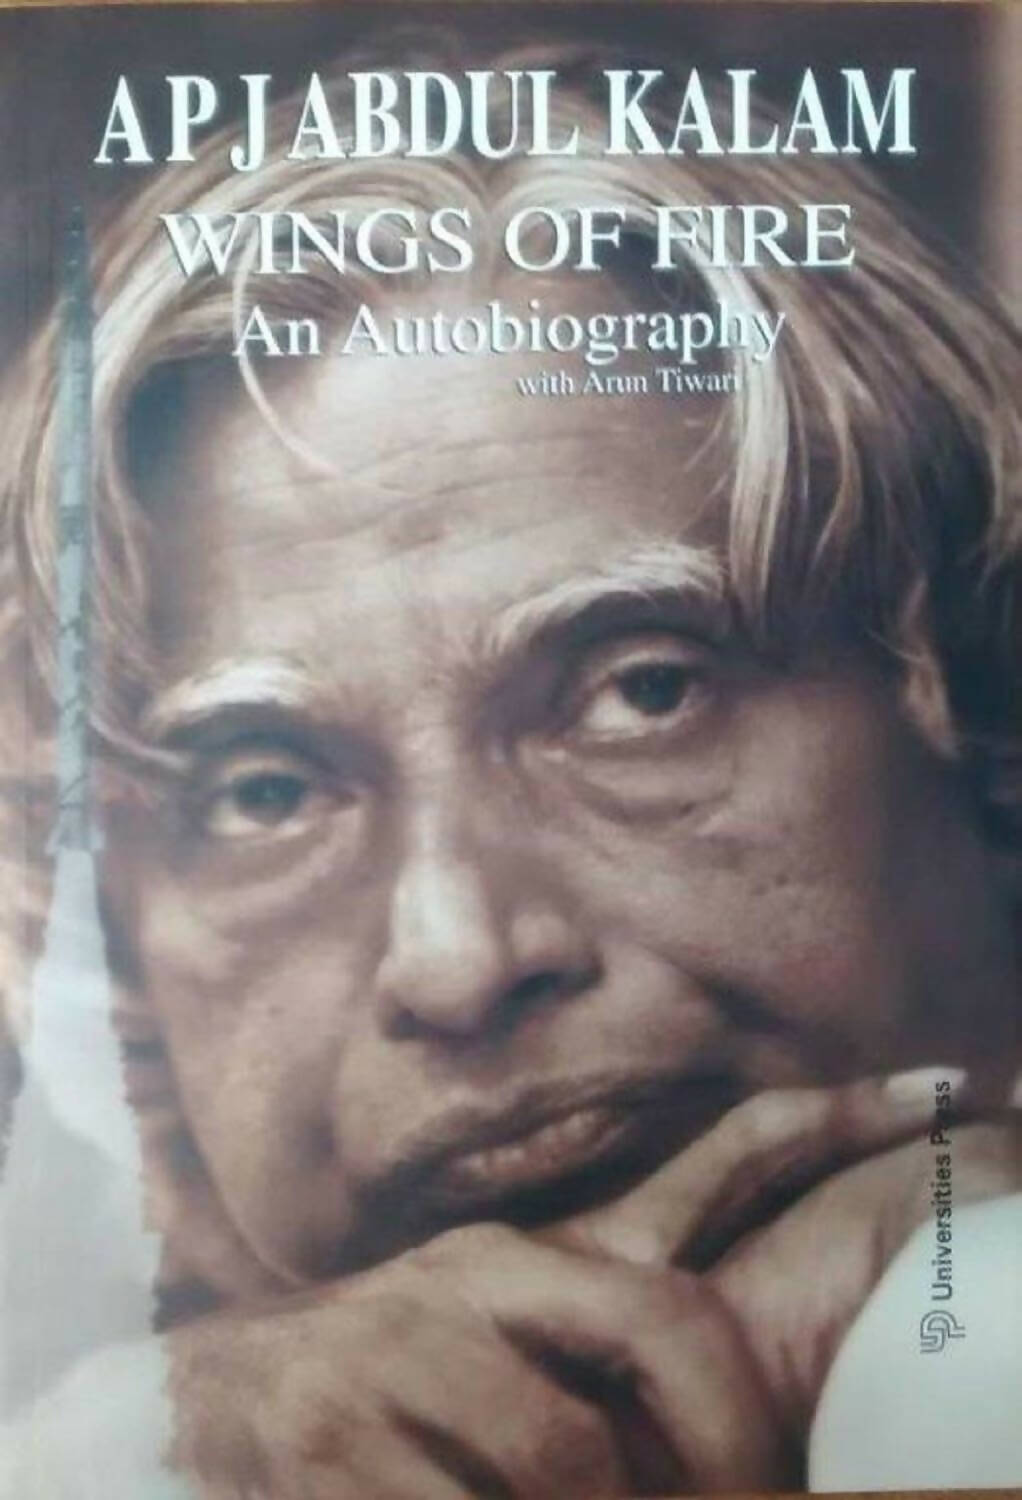 Wings Of Fire An Autobiography by by Arun Tiwari and A. P. J. Abdul Kalam